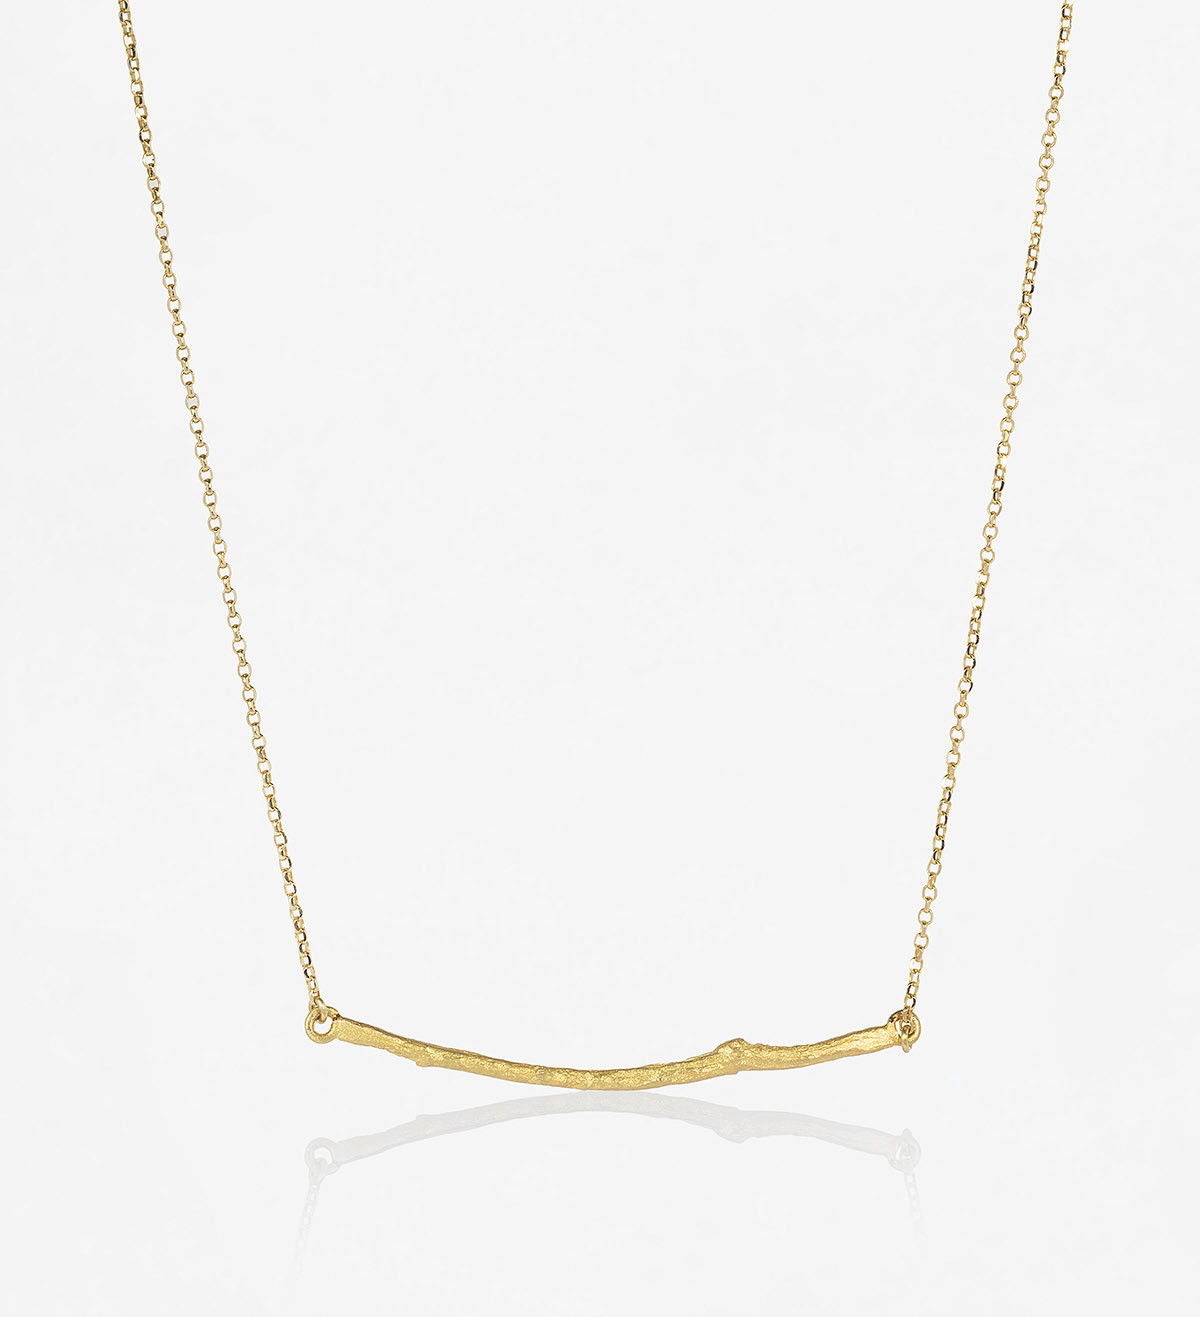 18k gold necklace Romaní with chain